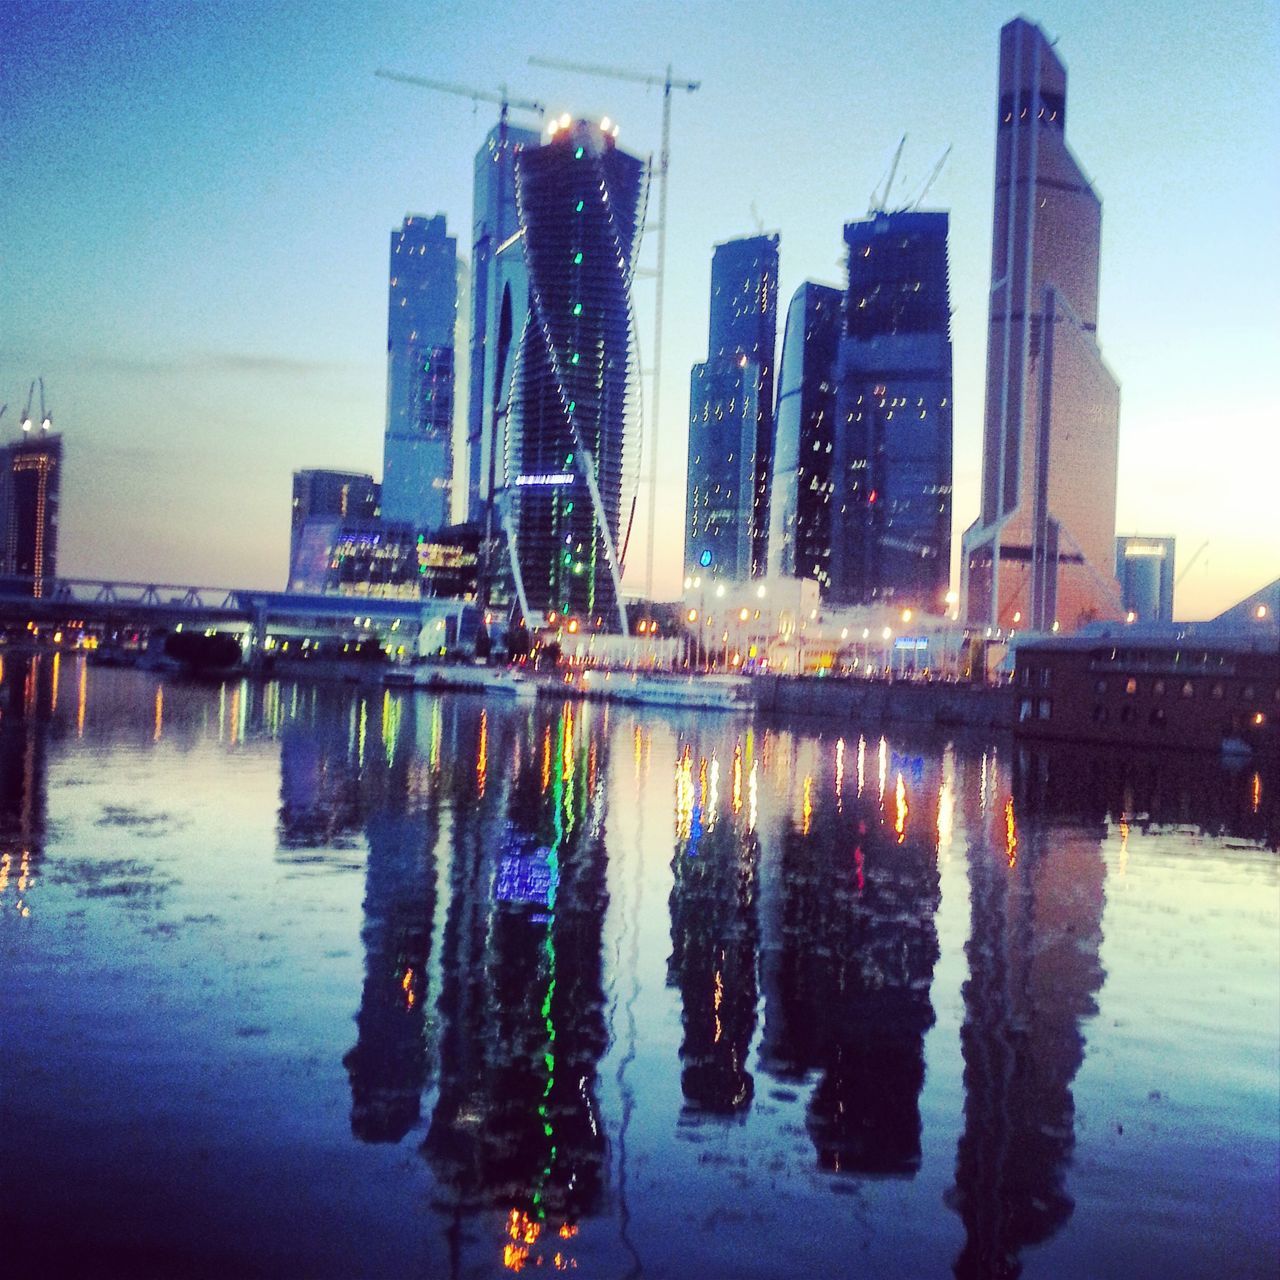 building exterior, architecture, reflection, built structure, water, city, skyscraper, waterfront, modern, tall - high, urban skyline, illuminated, tower, sky, office building, cityscape, river, development, building, dusk